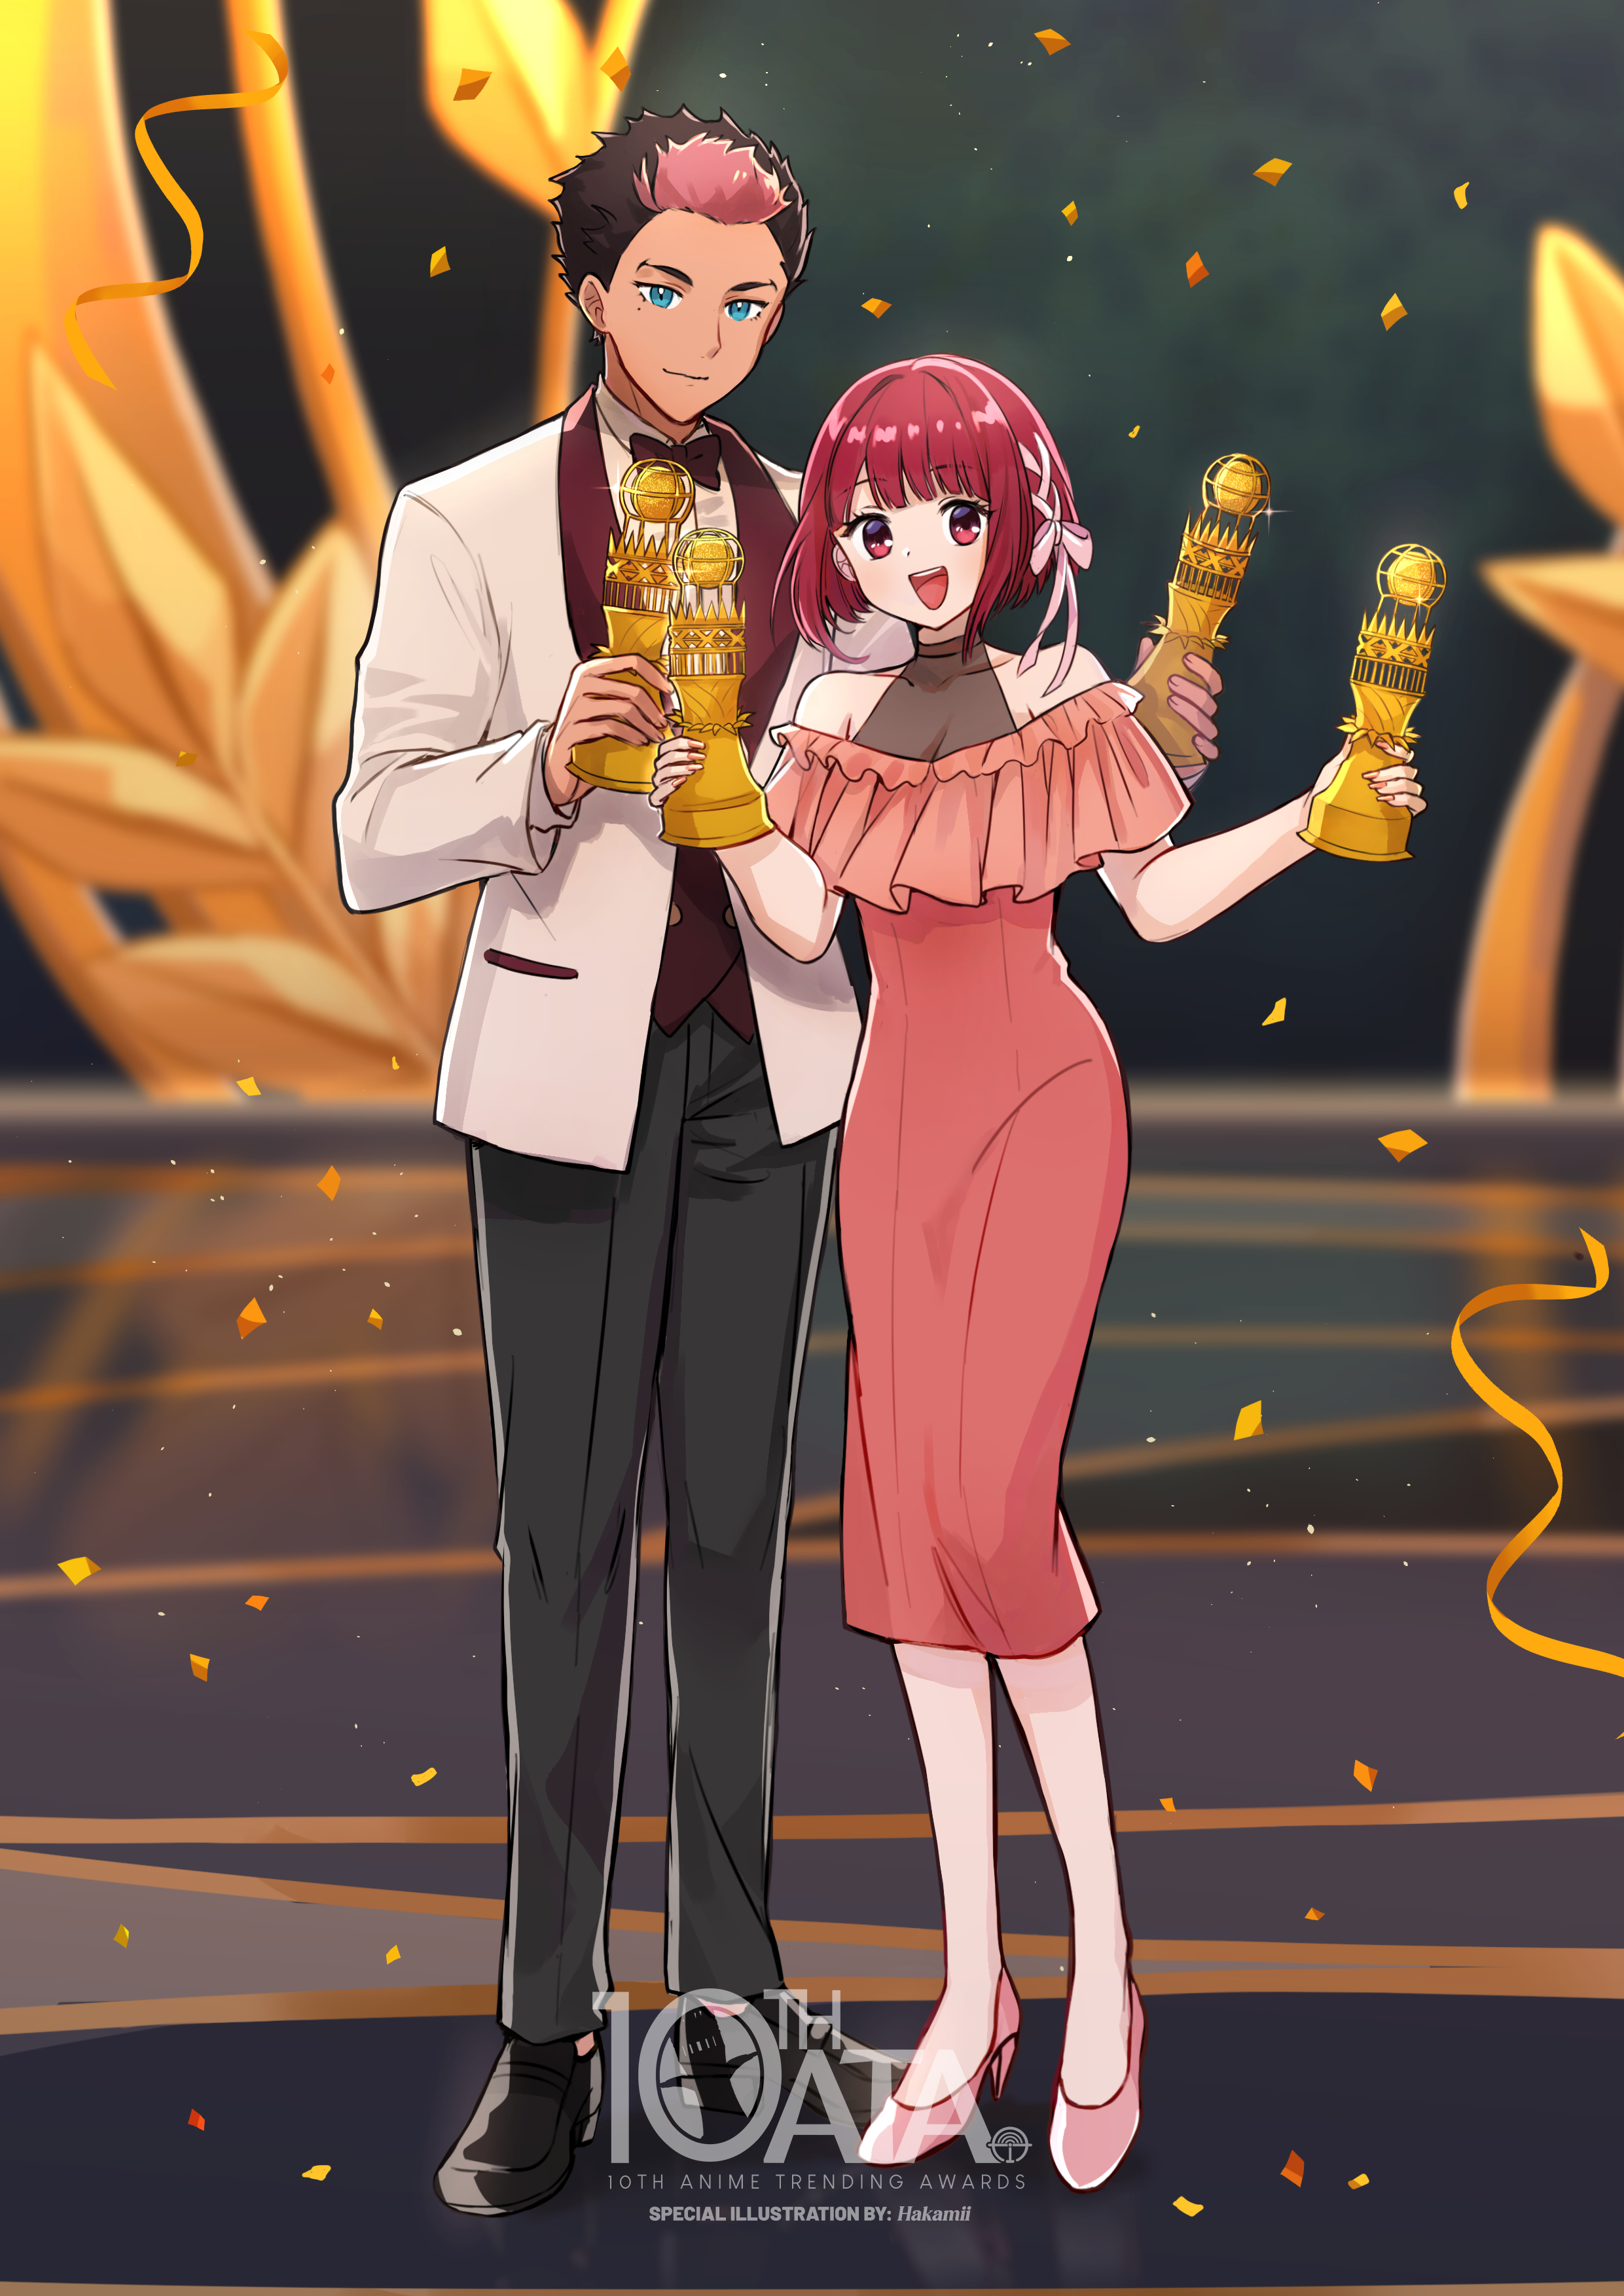 A Historic Characters of the Year win for Guel Jeturk and Kana Arima in the 10th Anime Trending Awards!